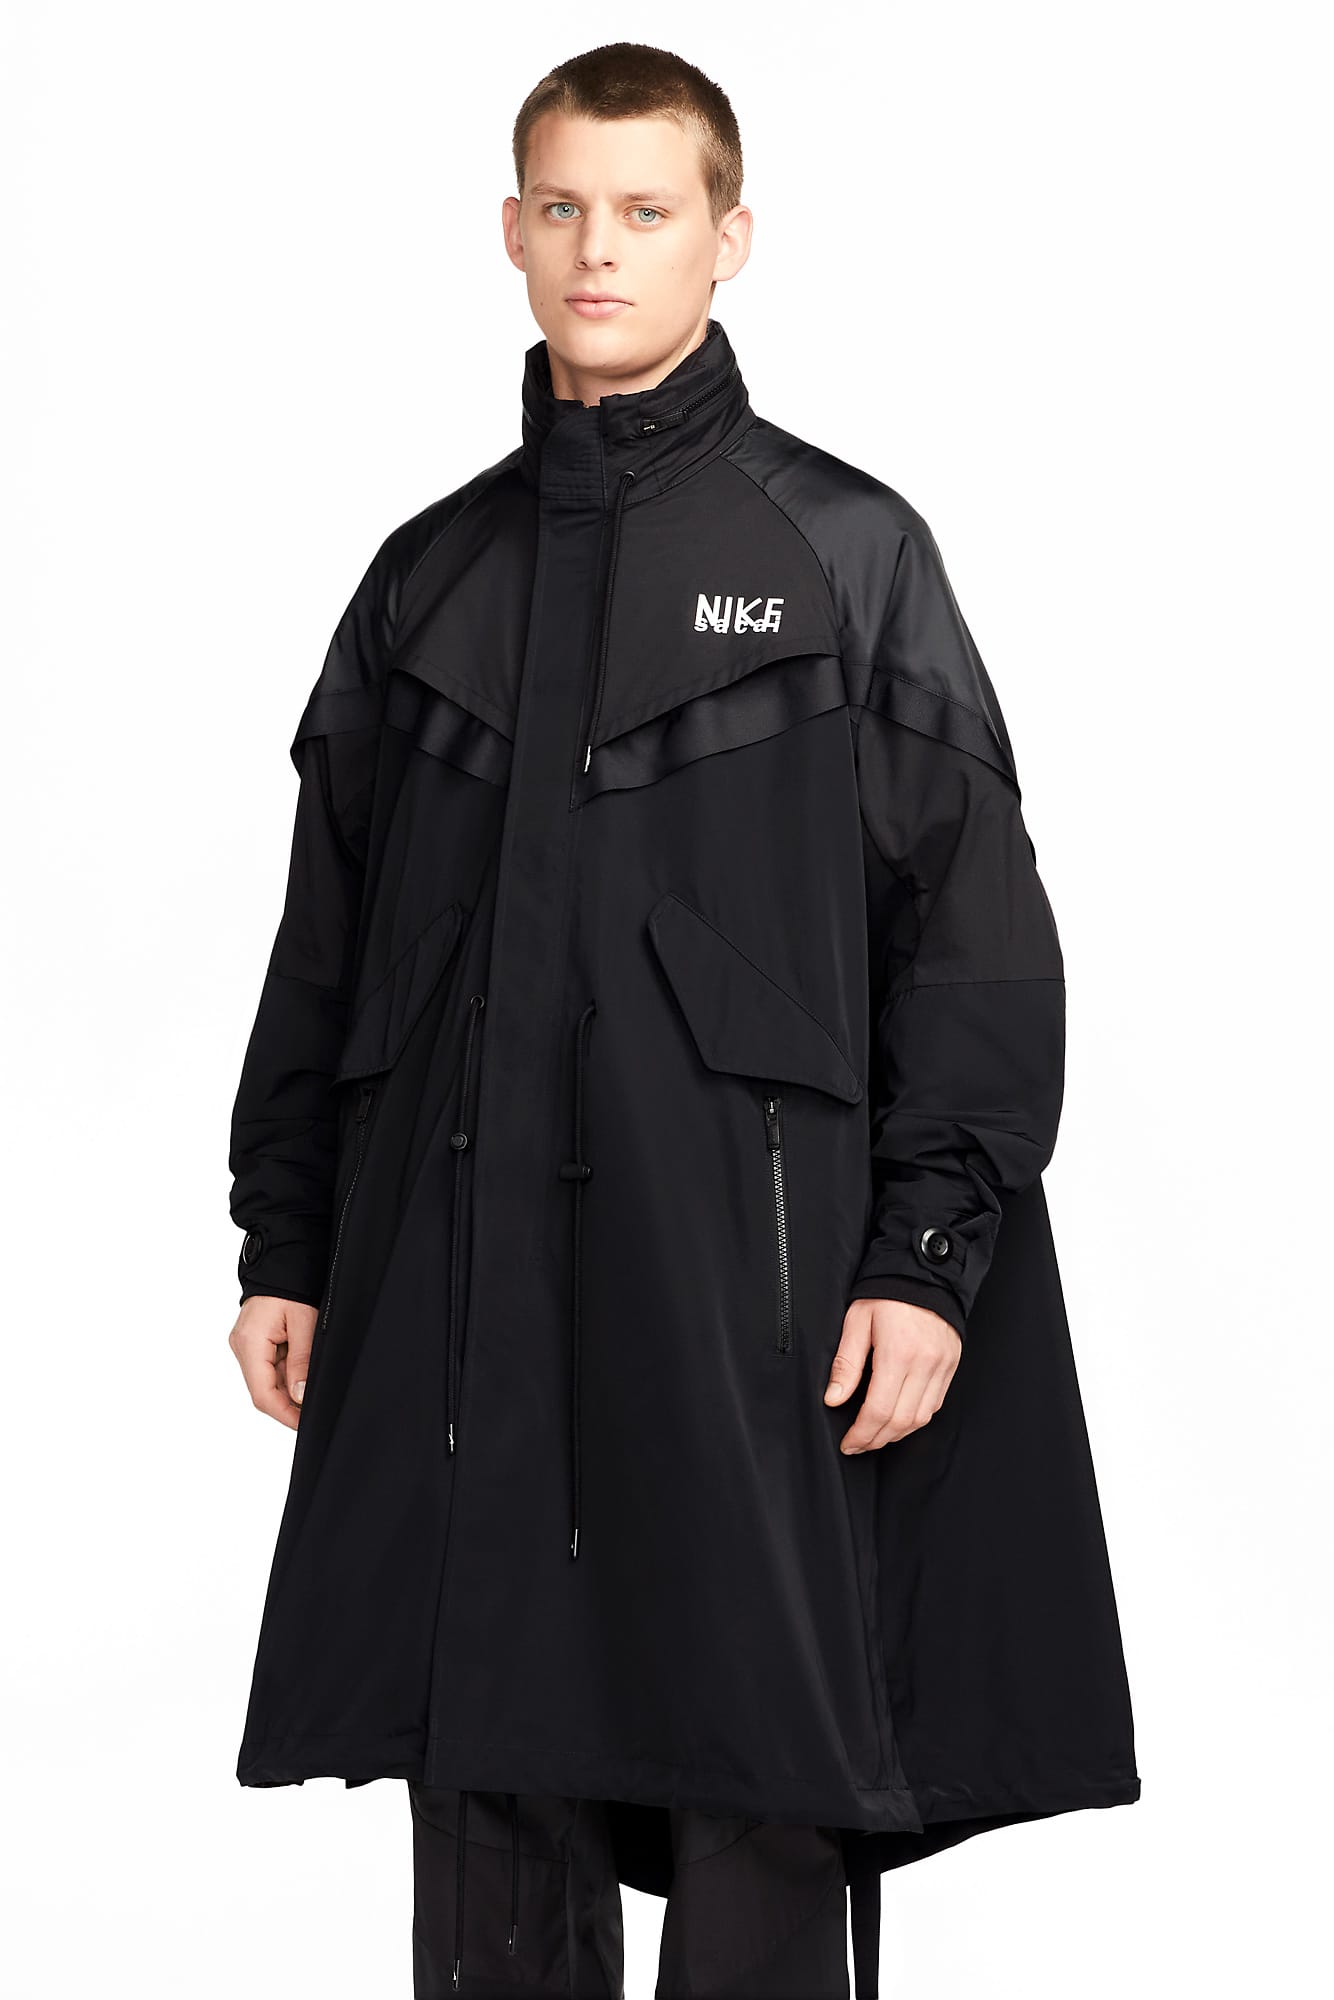 sacai Nike Trench Jacket DQ Release Date   Hypebeast